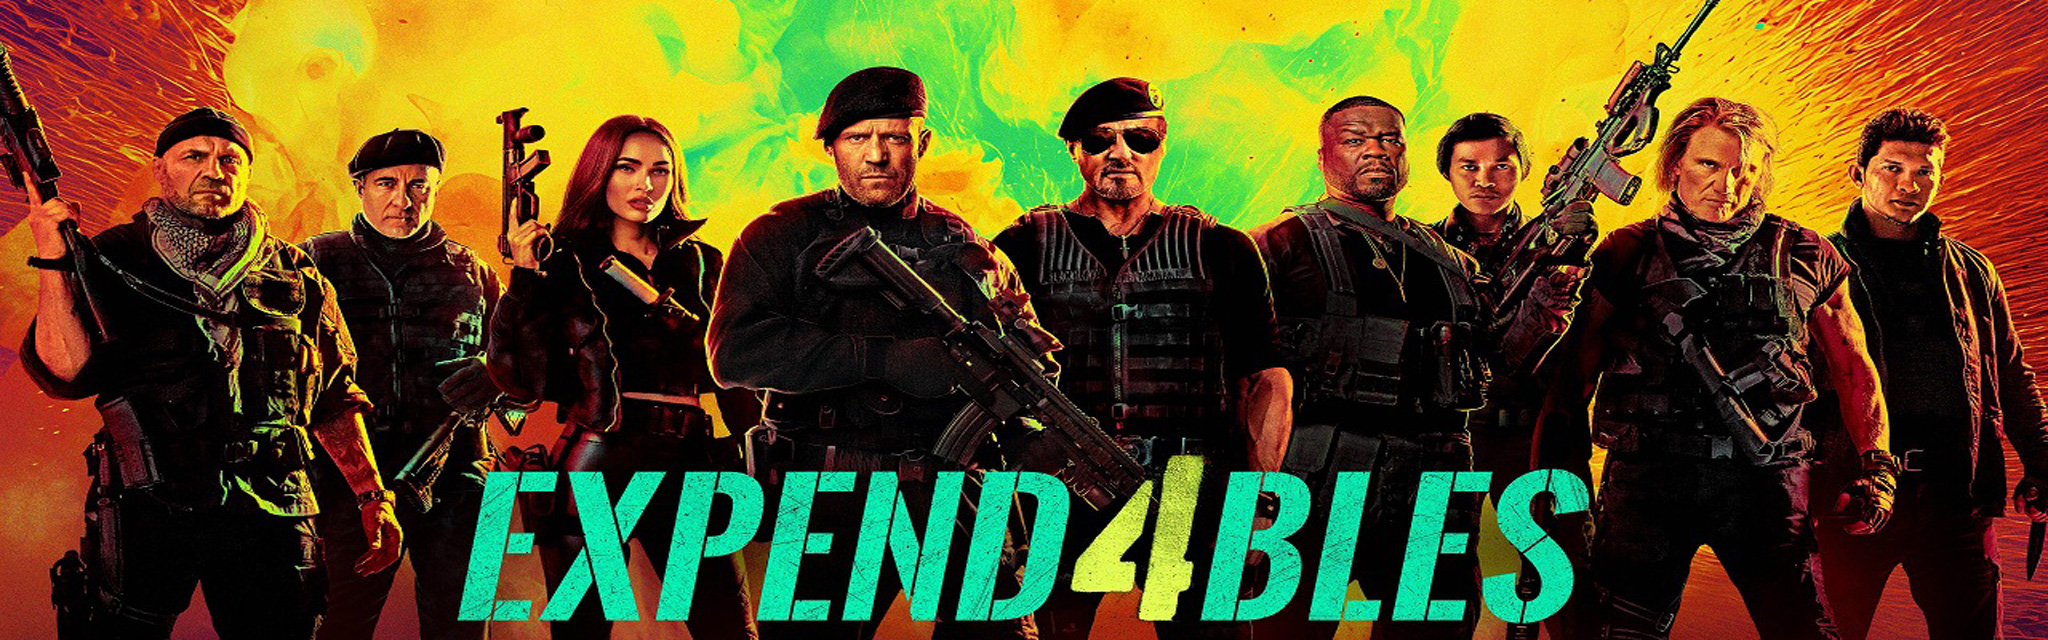  Expendables 4 [9161]